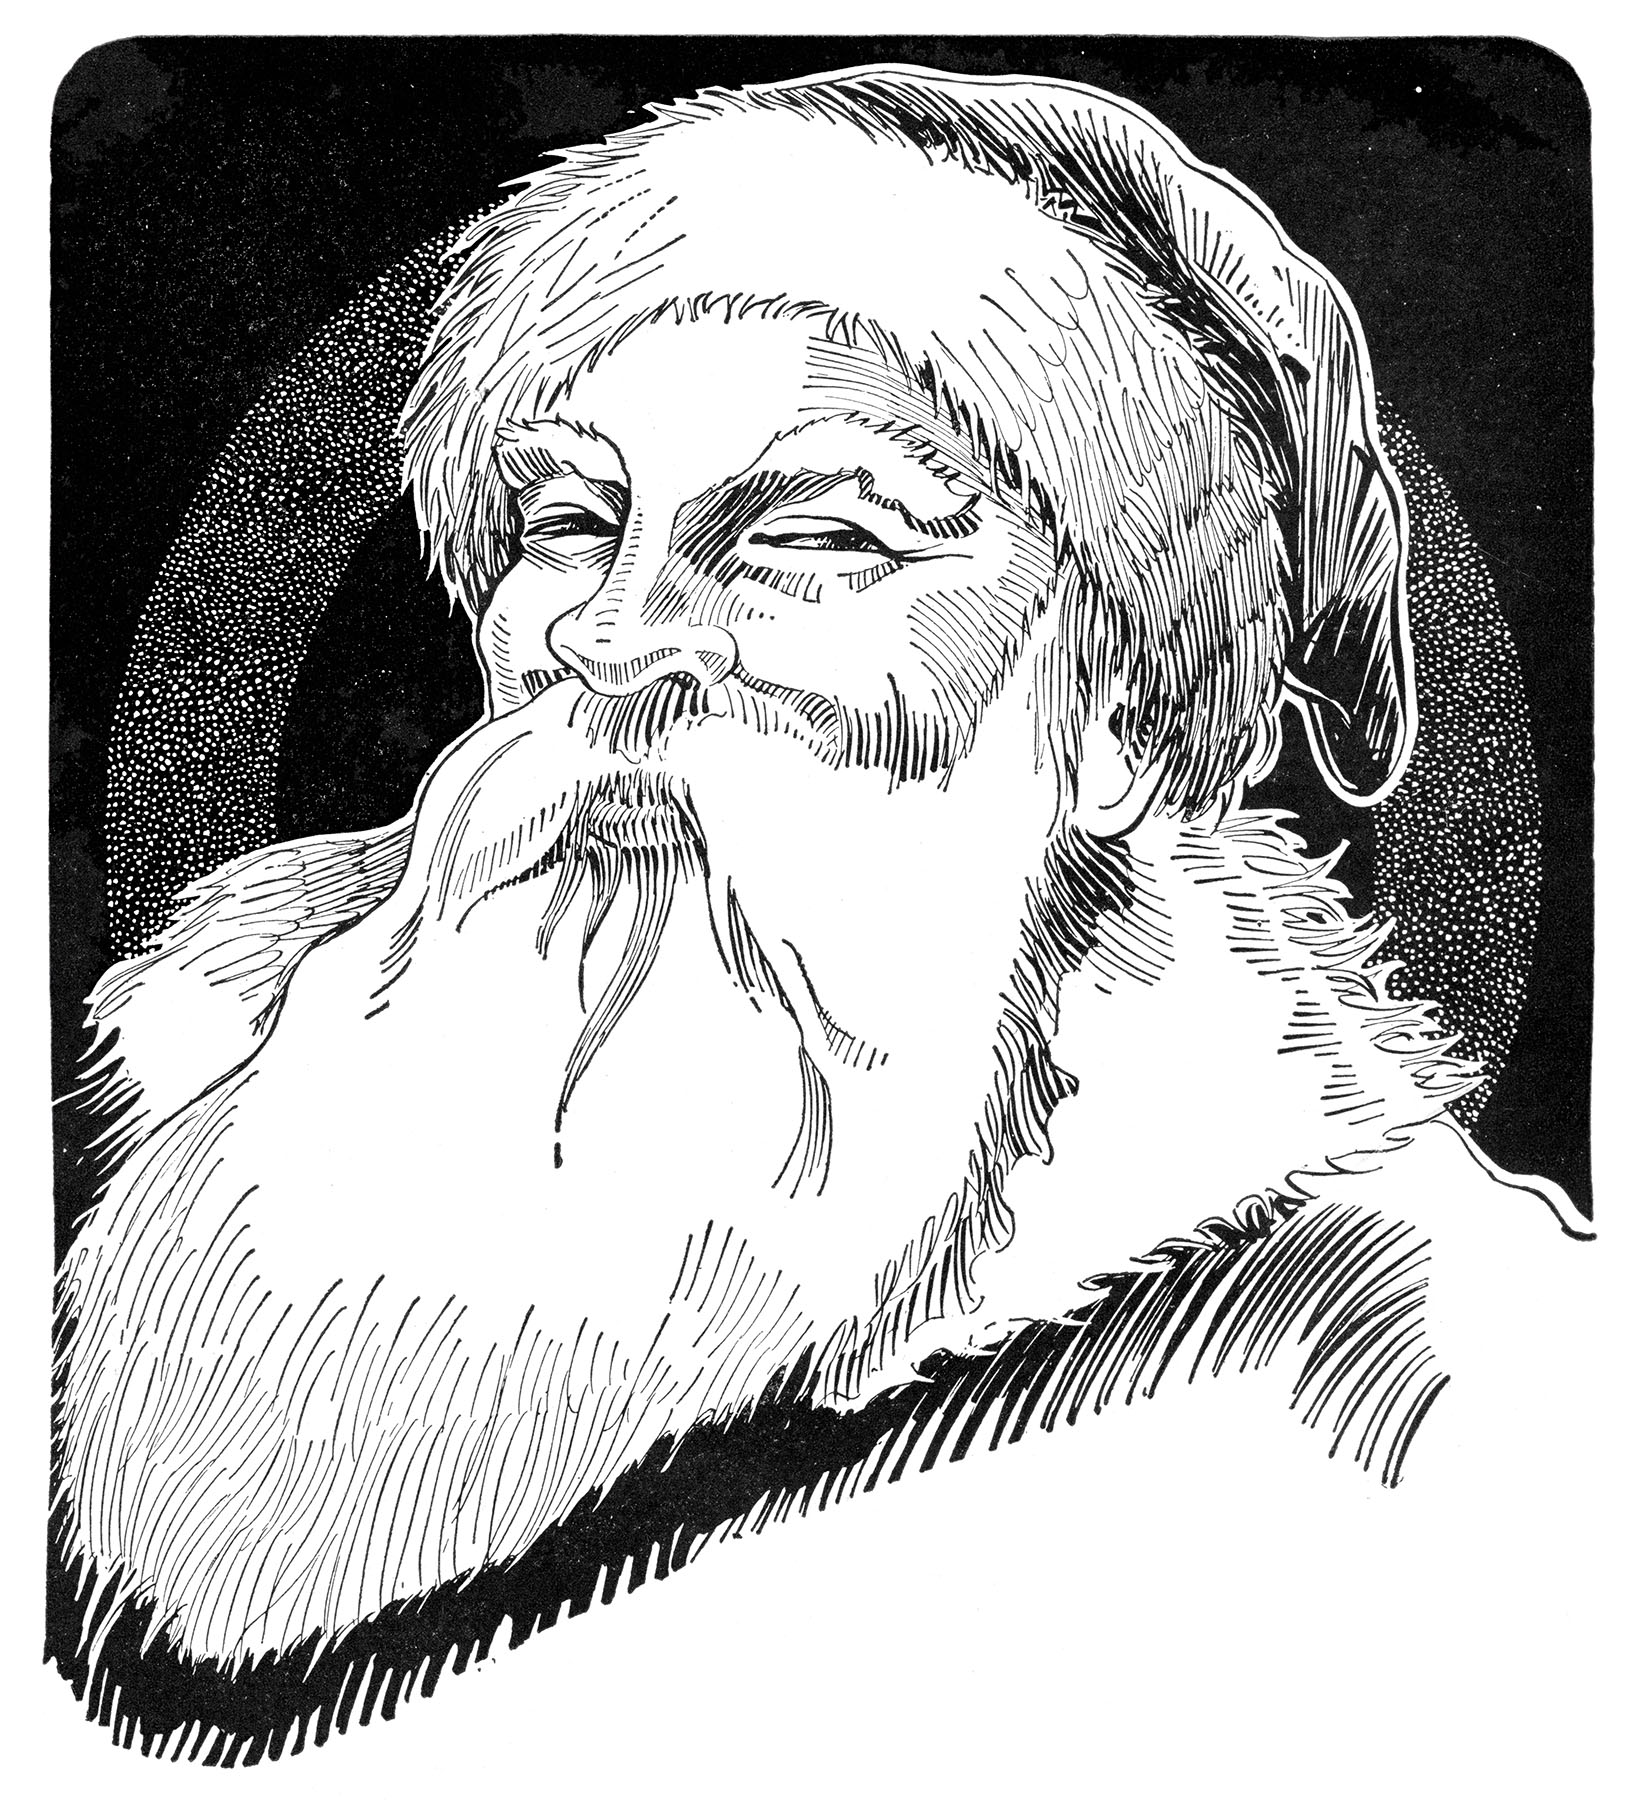 Black and white drawing of St Nick